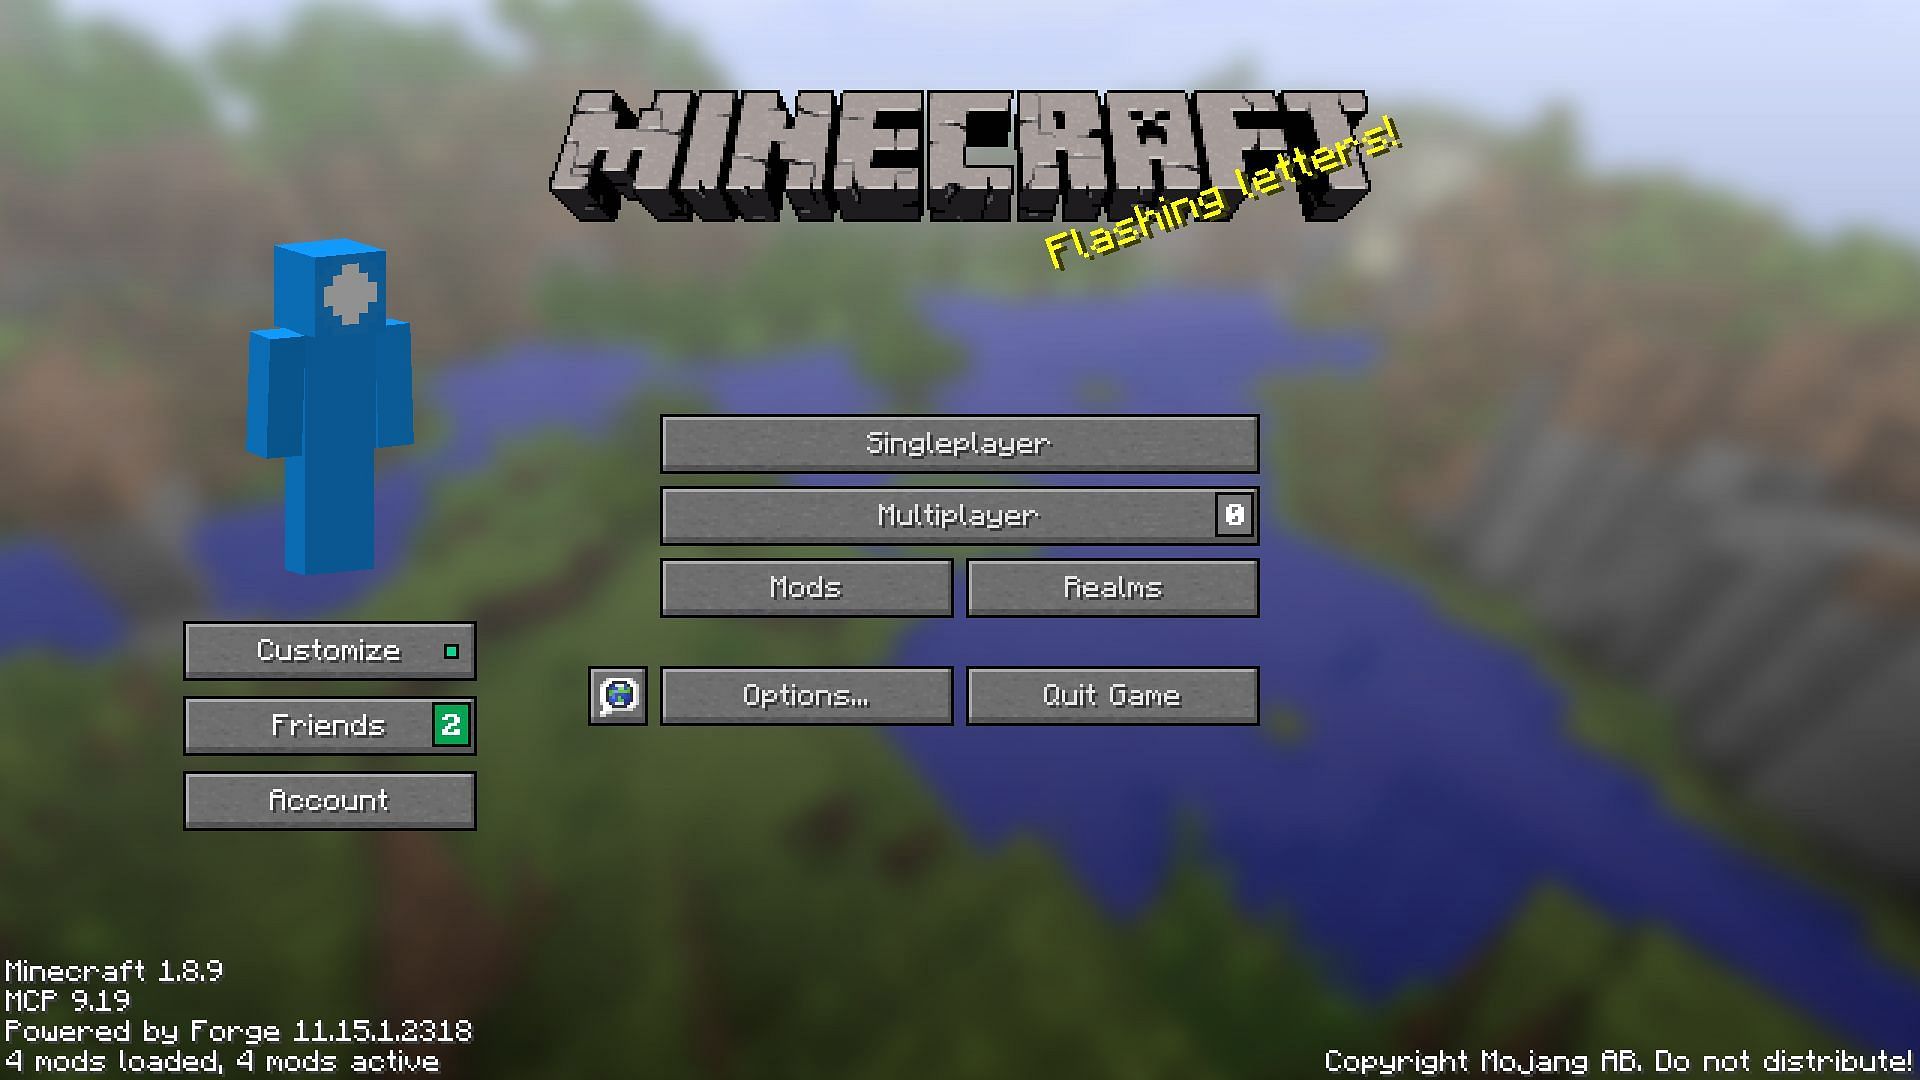 How to install and use Minecraft Essential mod